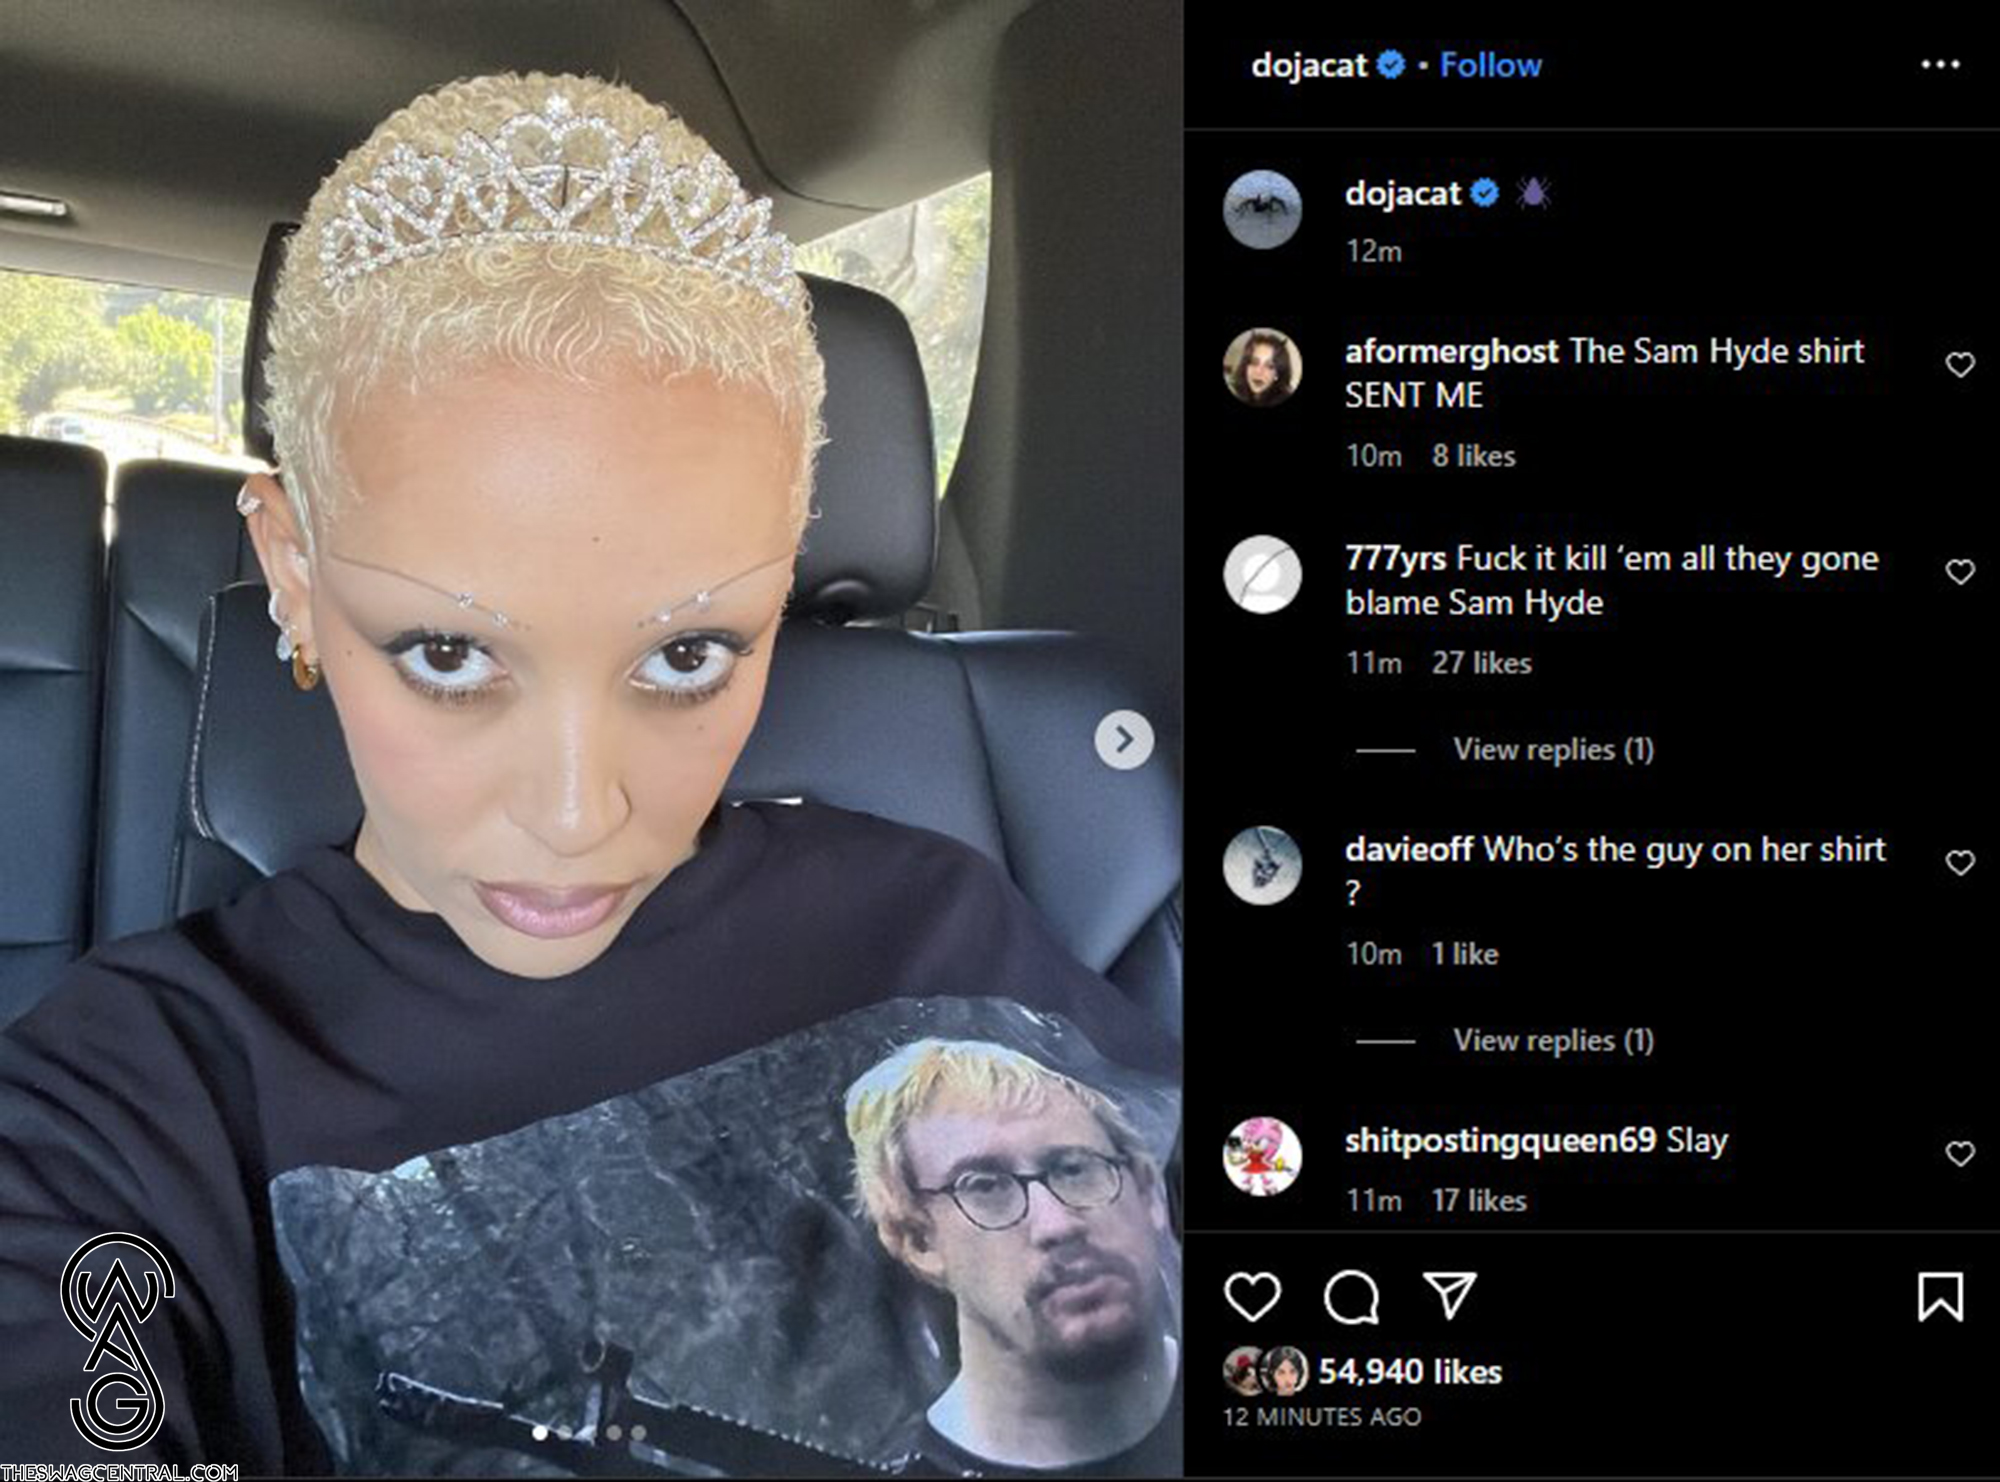 Doja Cat Sparks Controversy and Conversation as She Flaunts Sam Hyde Shirt in Latest Photo